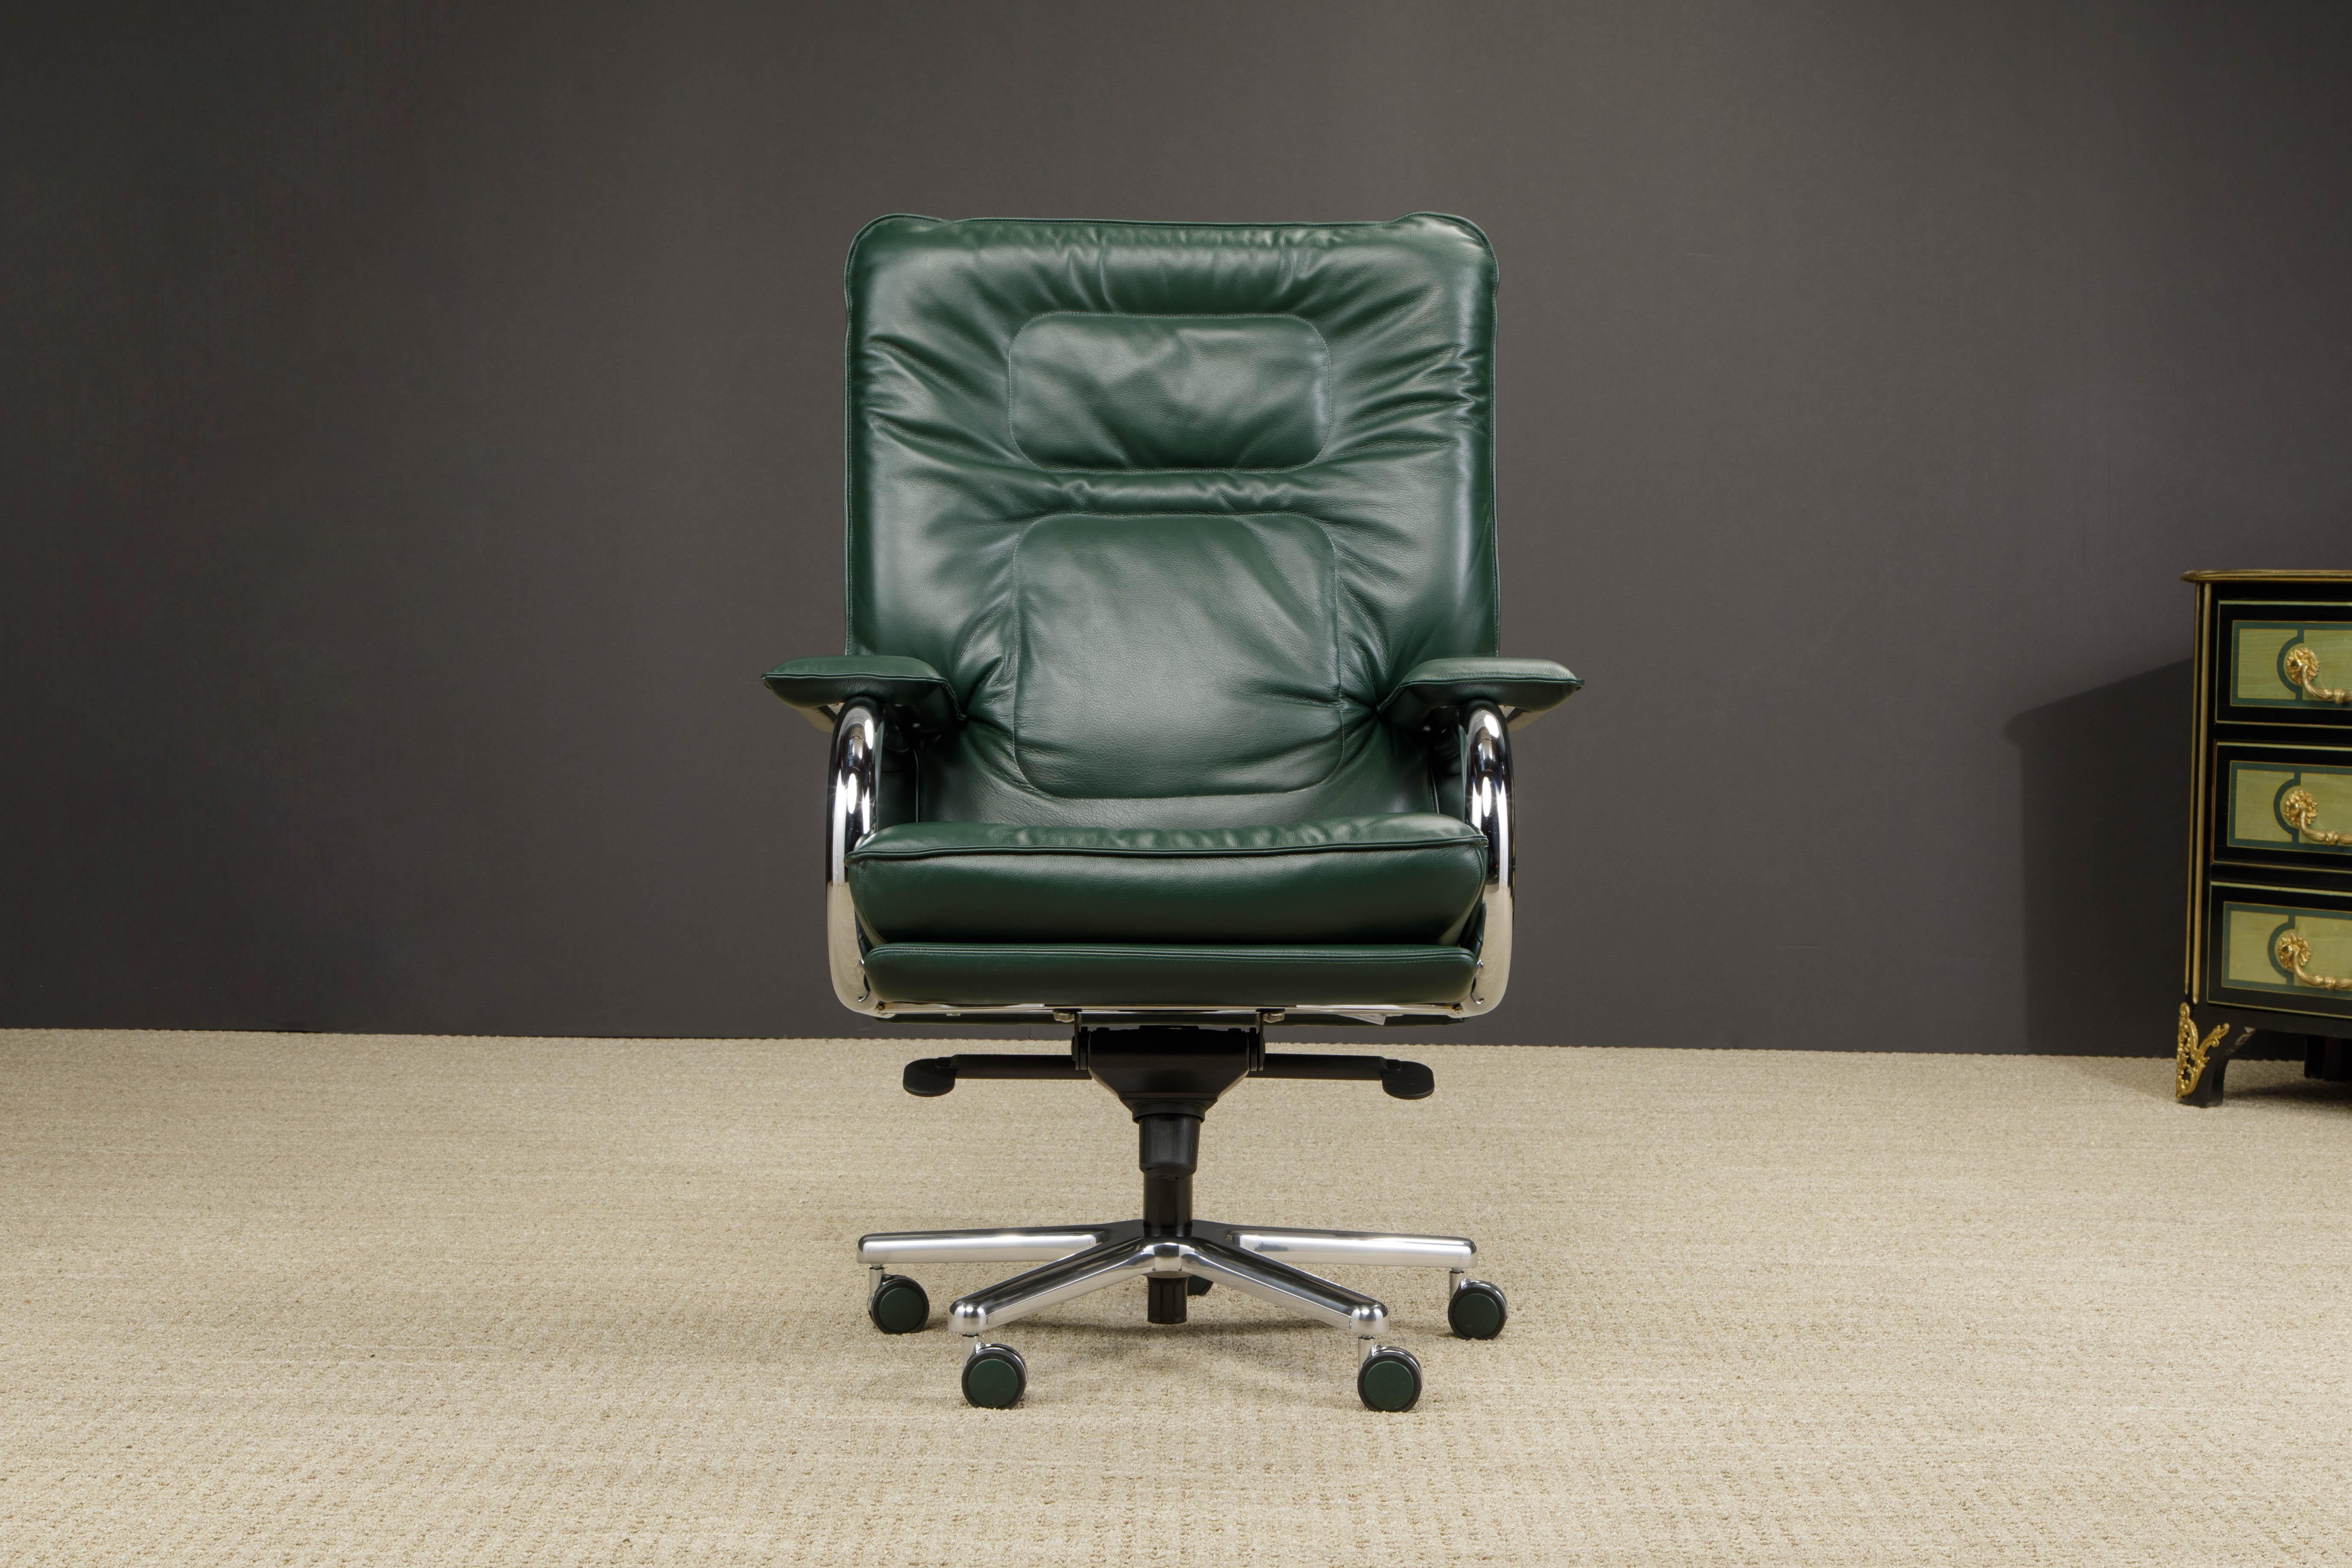 This incredible executives chair is named 'Big', designed by Guido Faleschini by i4 Mariani originally designed in the 1970s, this example newly produced in a gorgeous emerald green leather. 

*Note, we have one available for immediate shipment